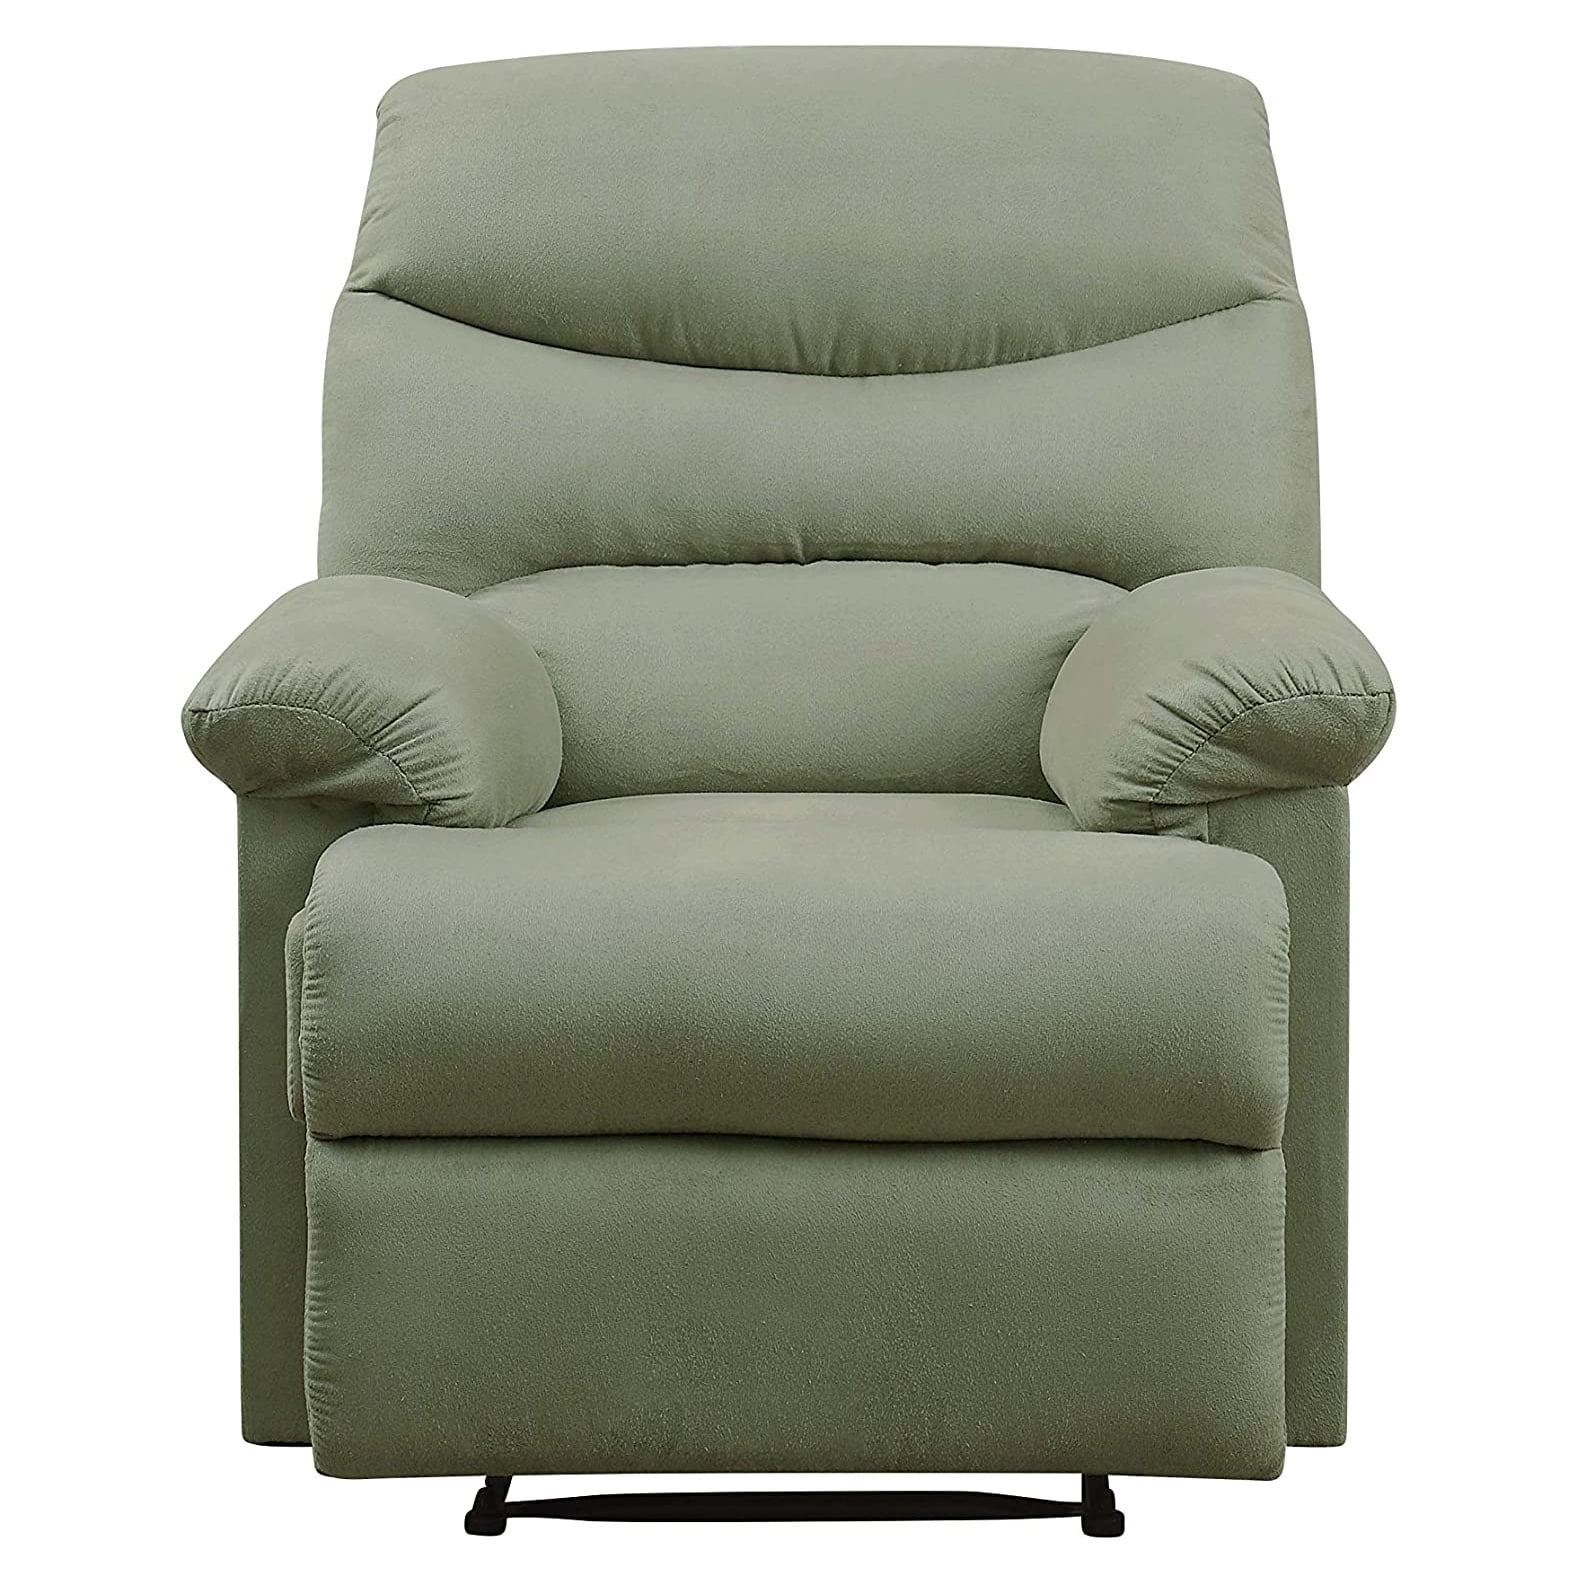 Picture of Acme Furniture 00630 26 x 24 x 48 in. Arcadia Recliner - Motion, Sage Microfiber